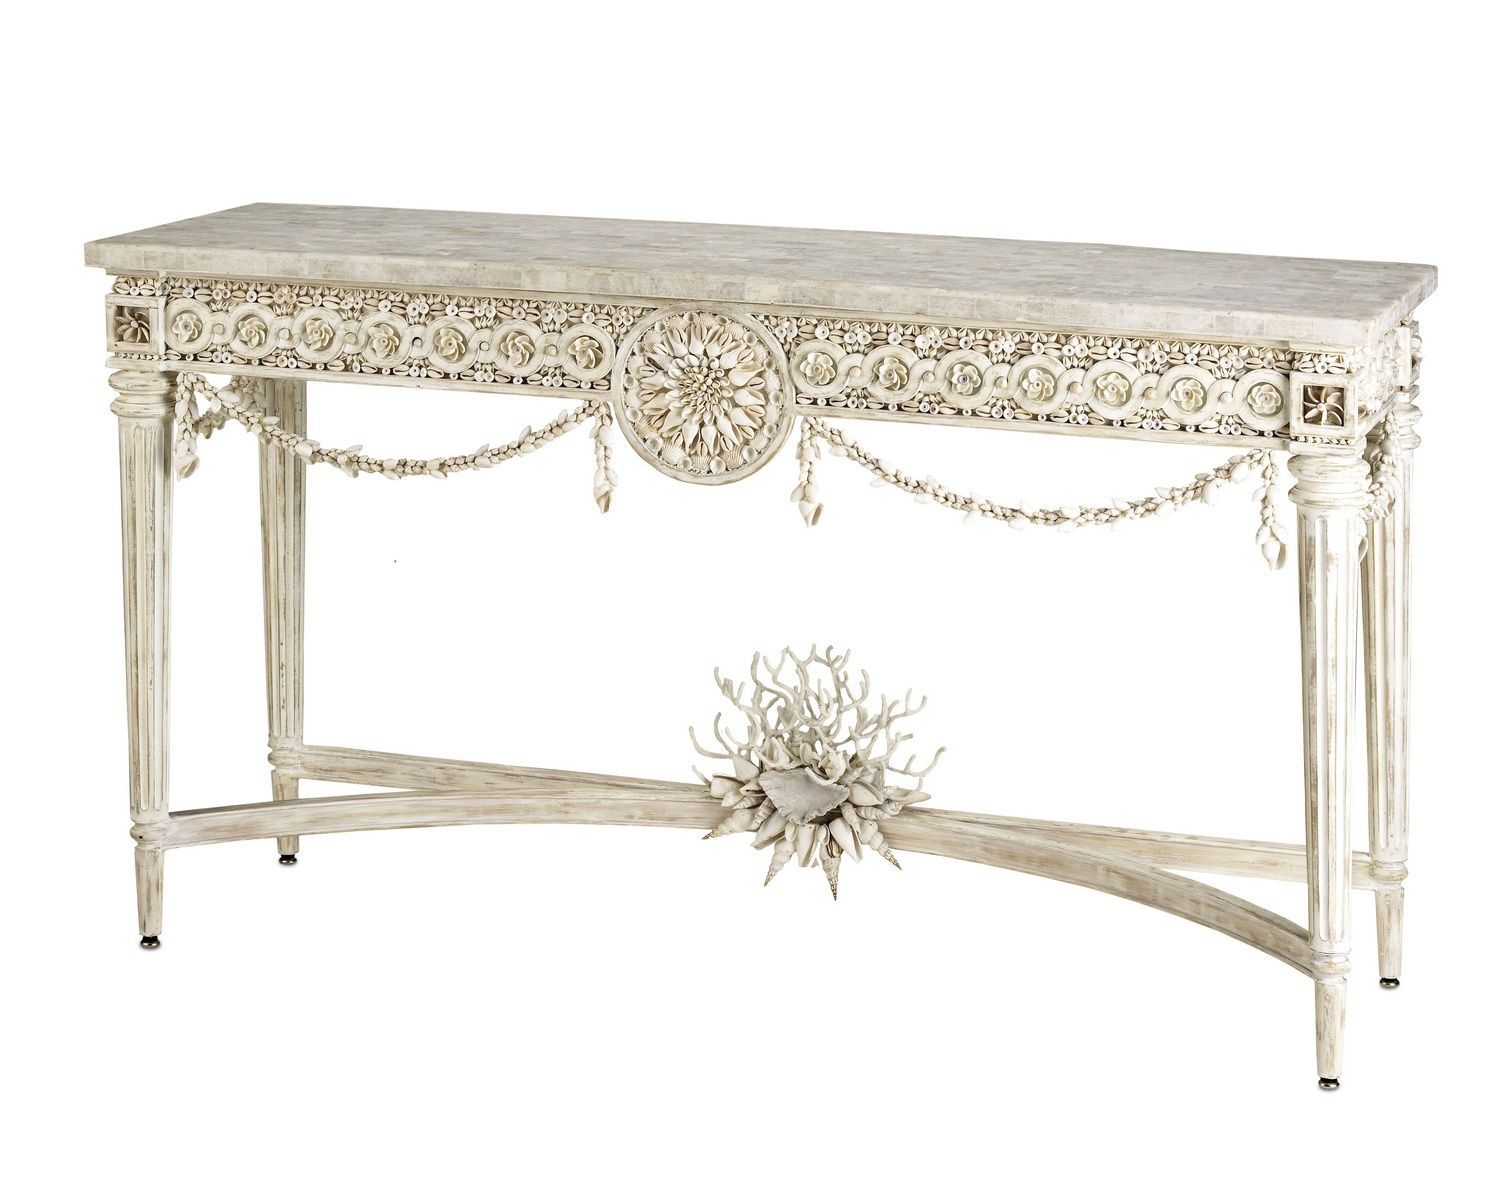 The Detailed And Elegant Devereux Console Table Is An Regarding Smoke Gray Wood Square Console Tables (View 11 of 20)